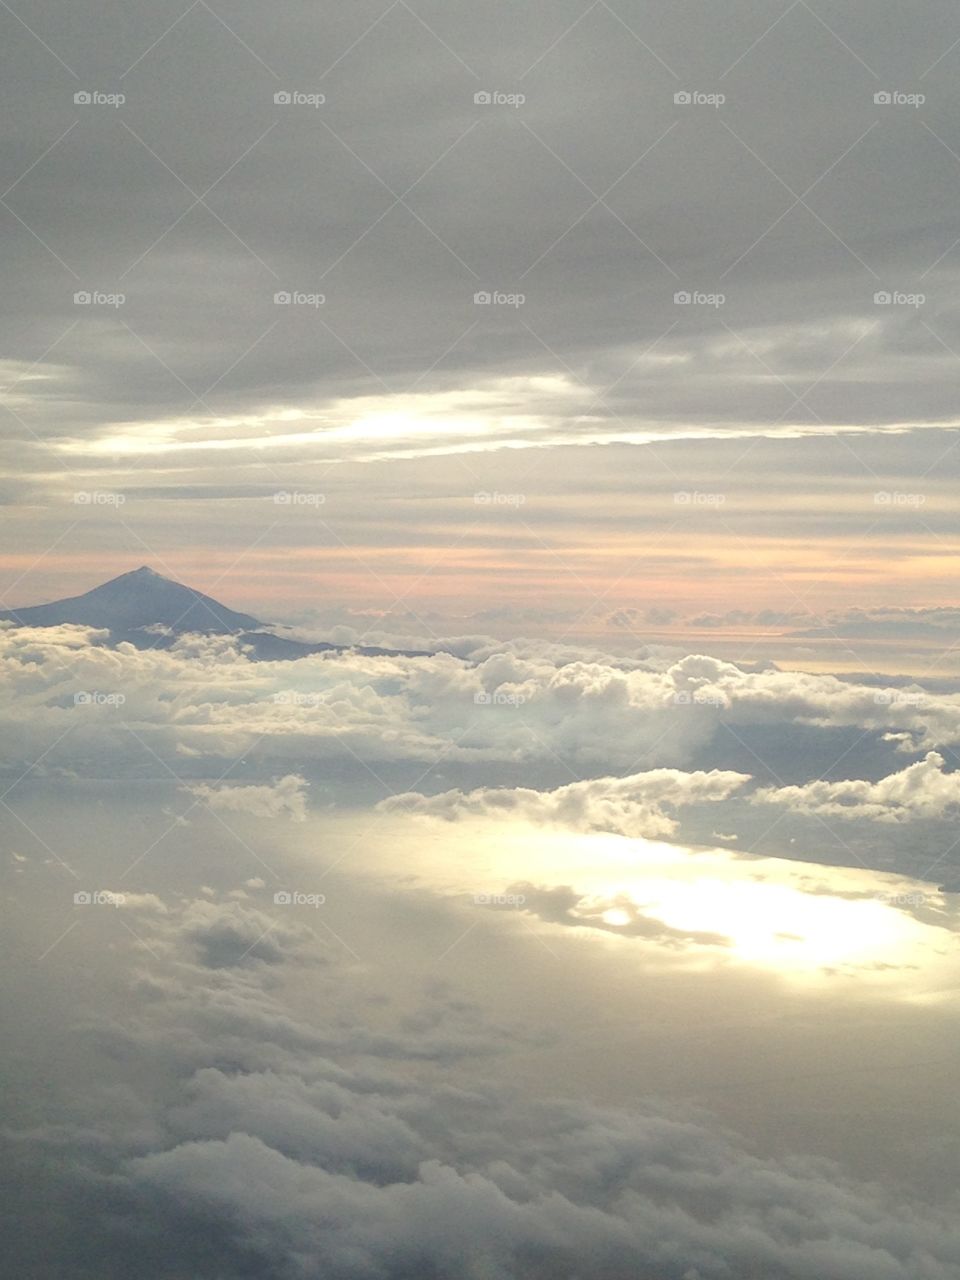 Mount Teide from the air